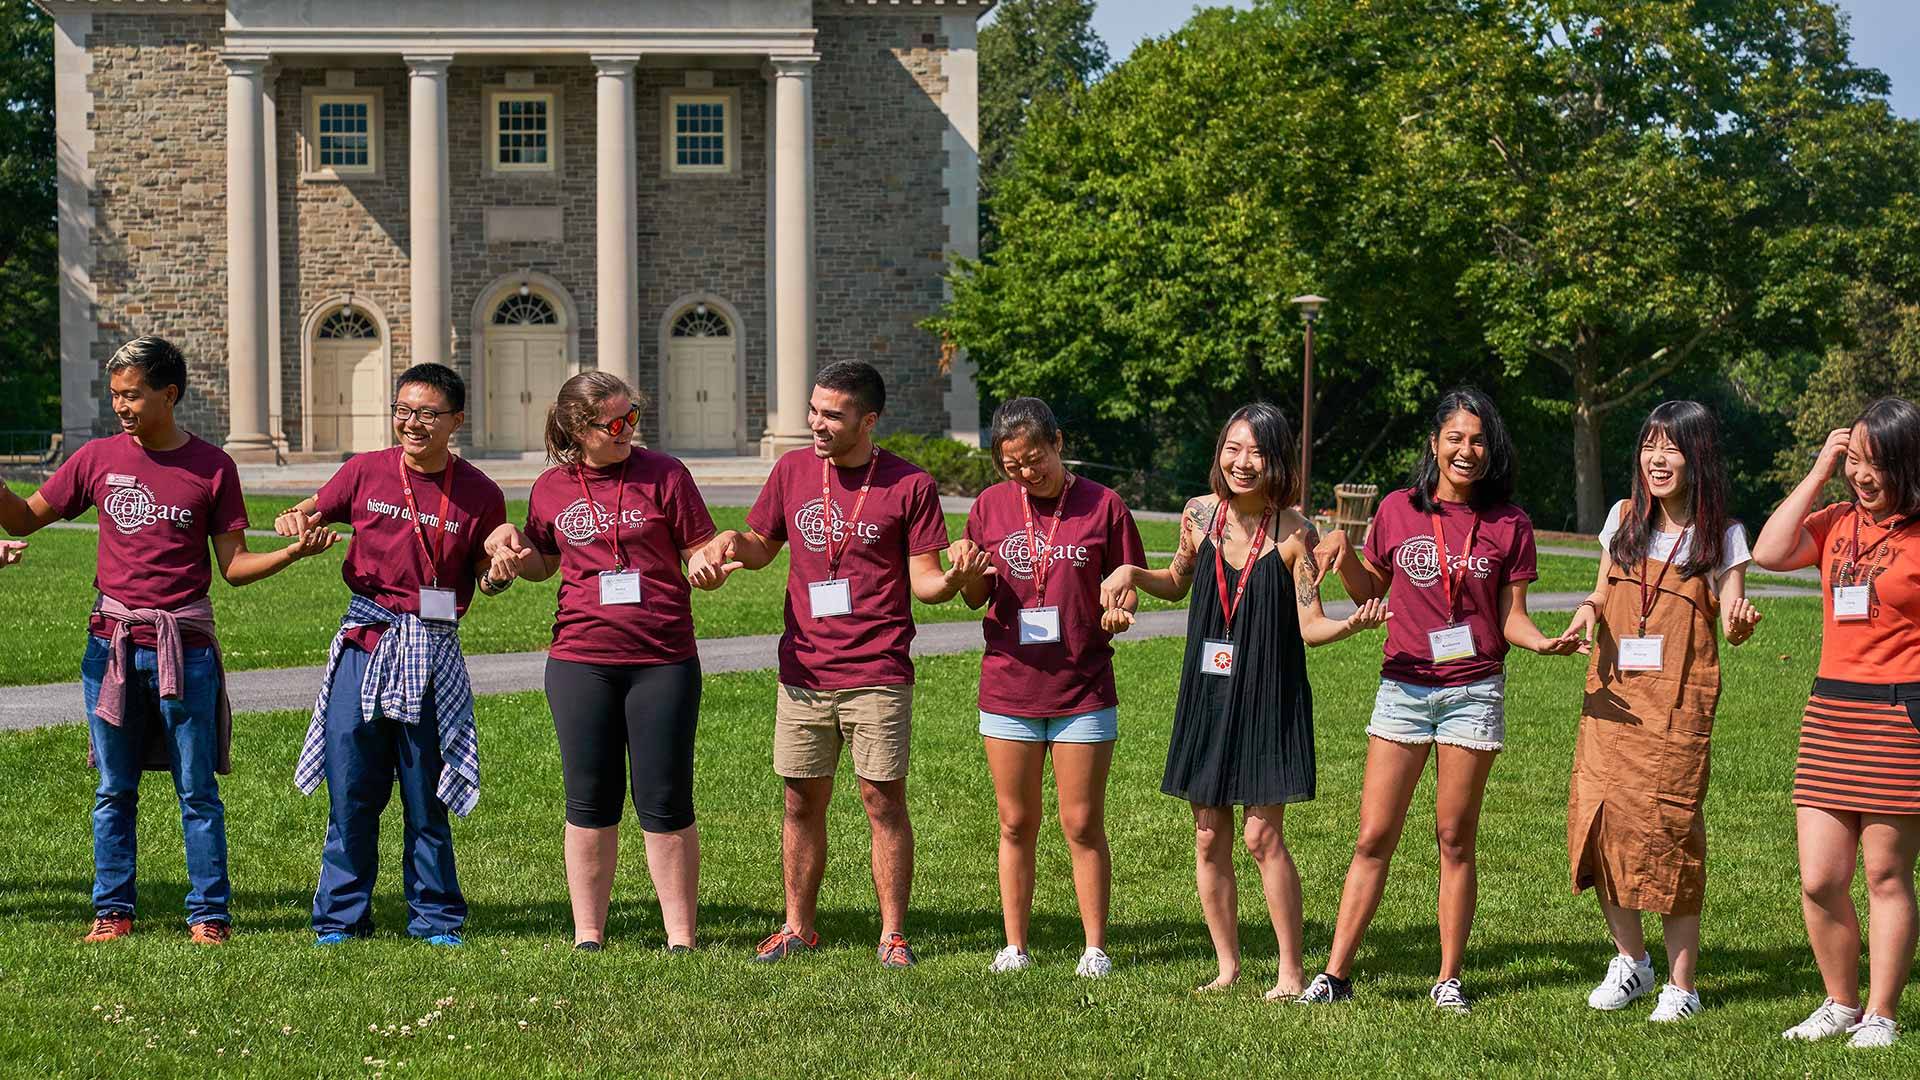 International students participate in a group activity to meet one another on Colgate's Academic Quad